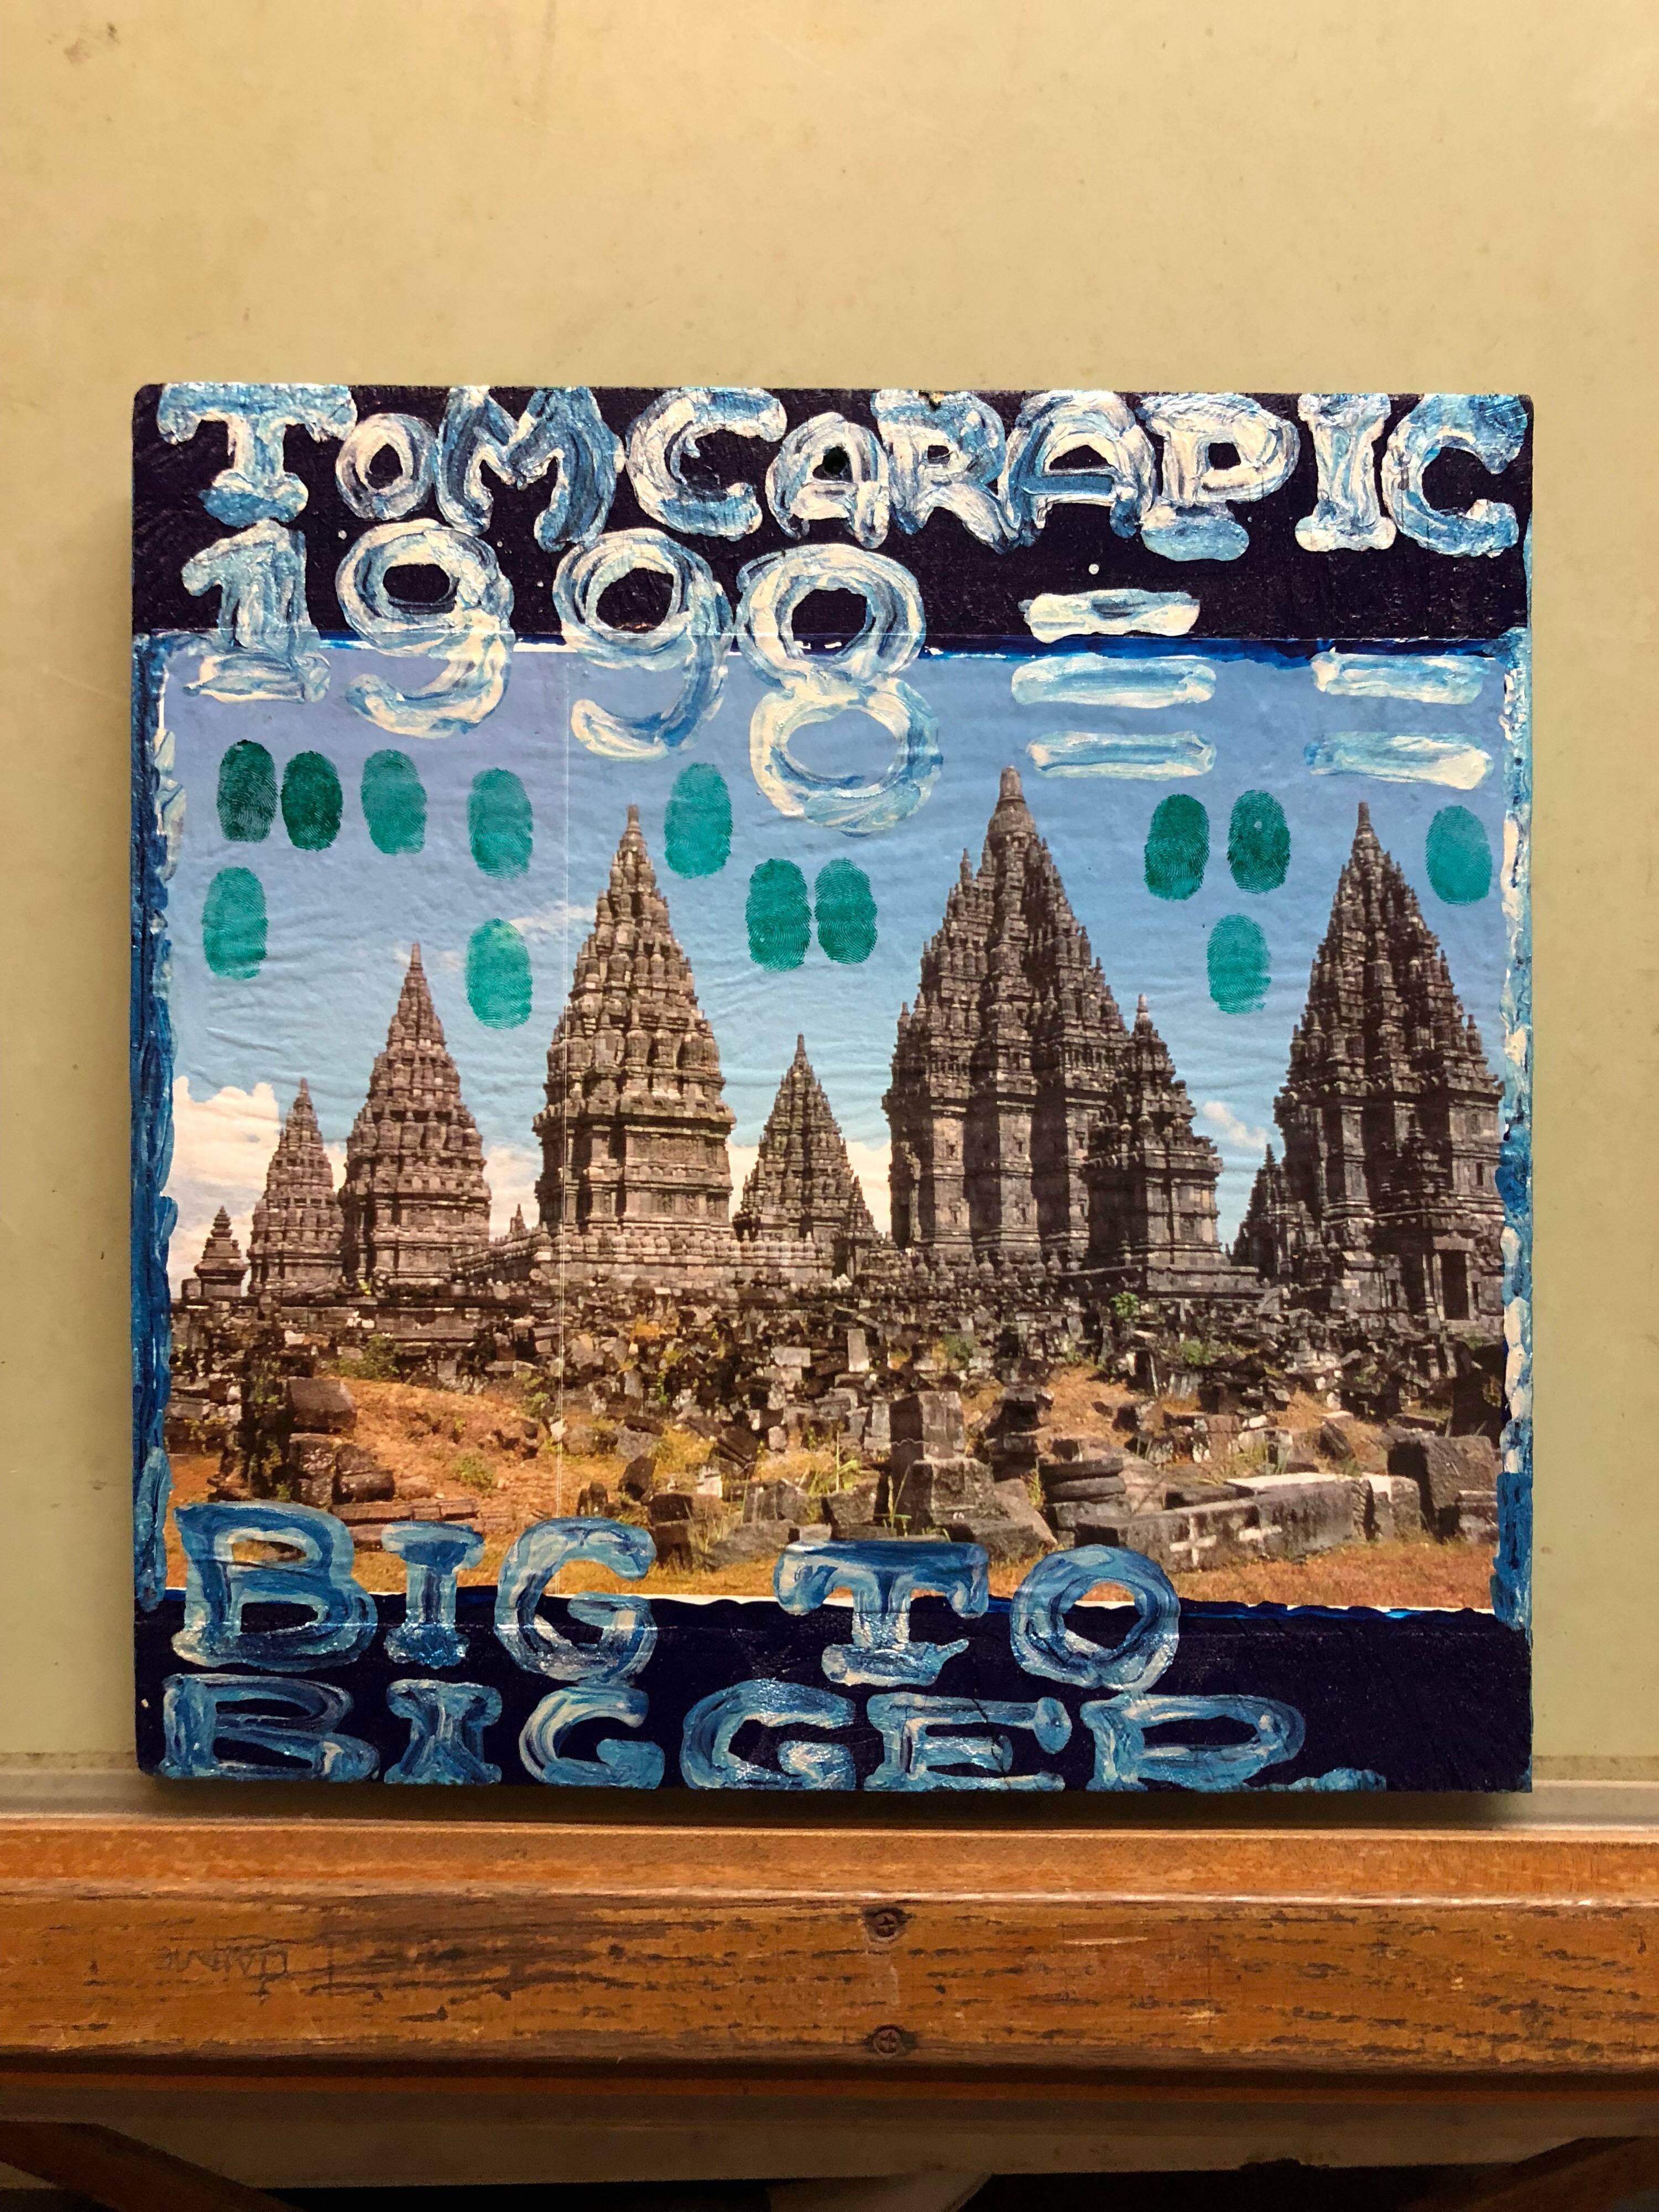 This one is 2 sided with the Brooklyn Bridge on one side and Angkor Wat on the other side. (Angkor is one of the most important archaeological sites in South-East Asia. Stretching over some 400 km2, including forested area, Angkor Archaeological